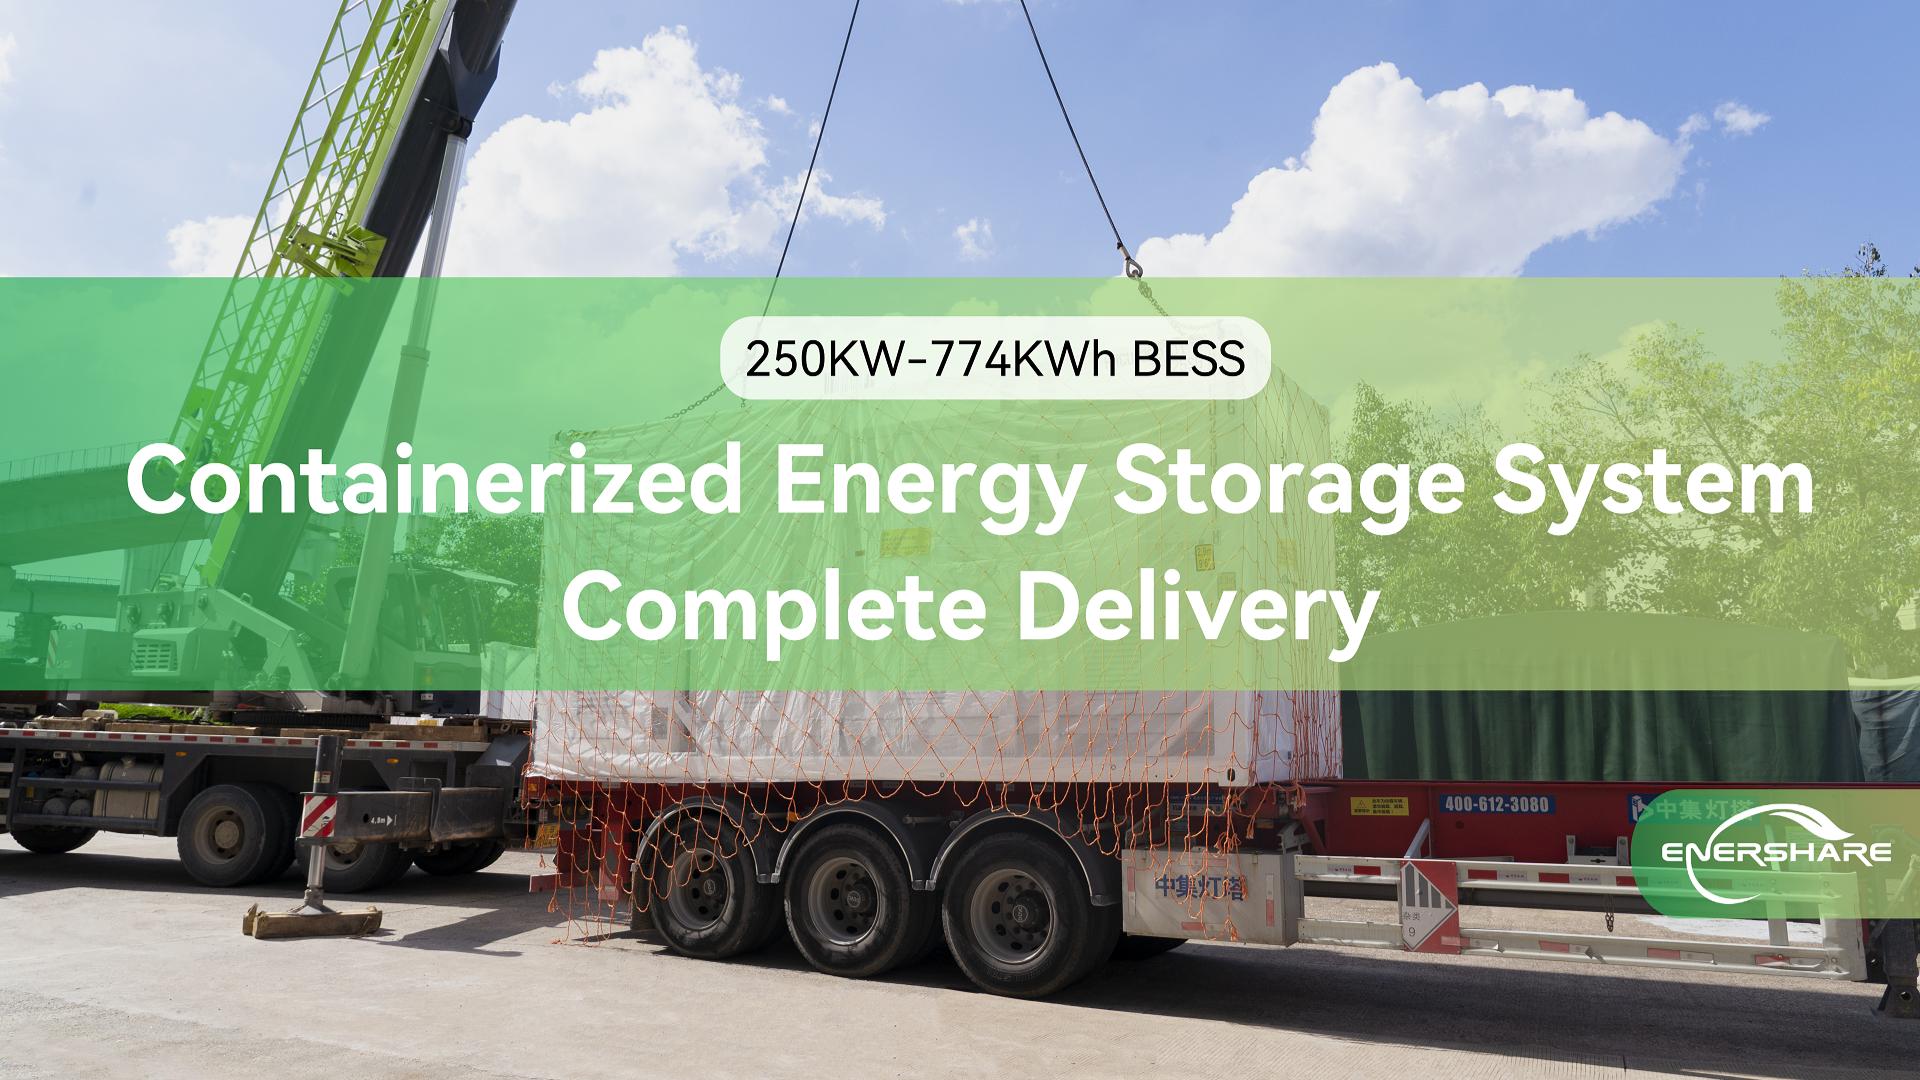 Complete delivery Containerized Energy Storage System---20FT 250KW-774KWh BESS